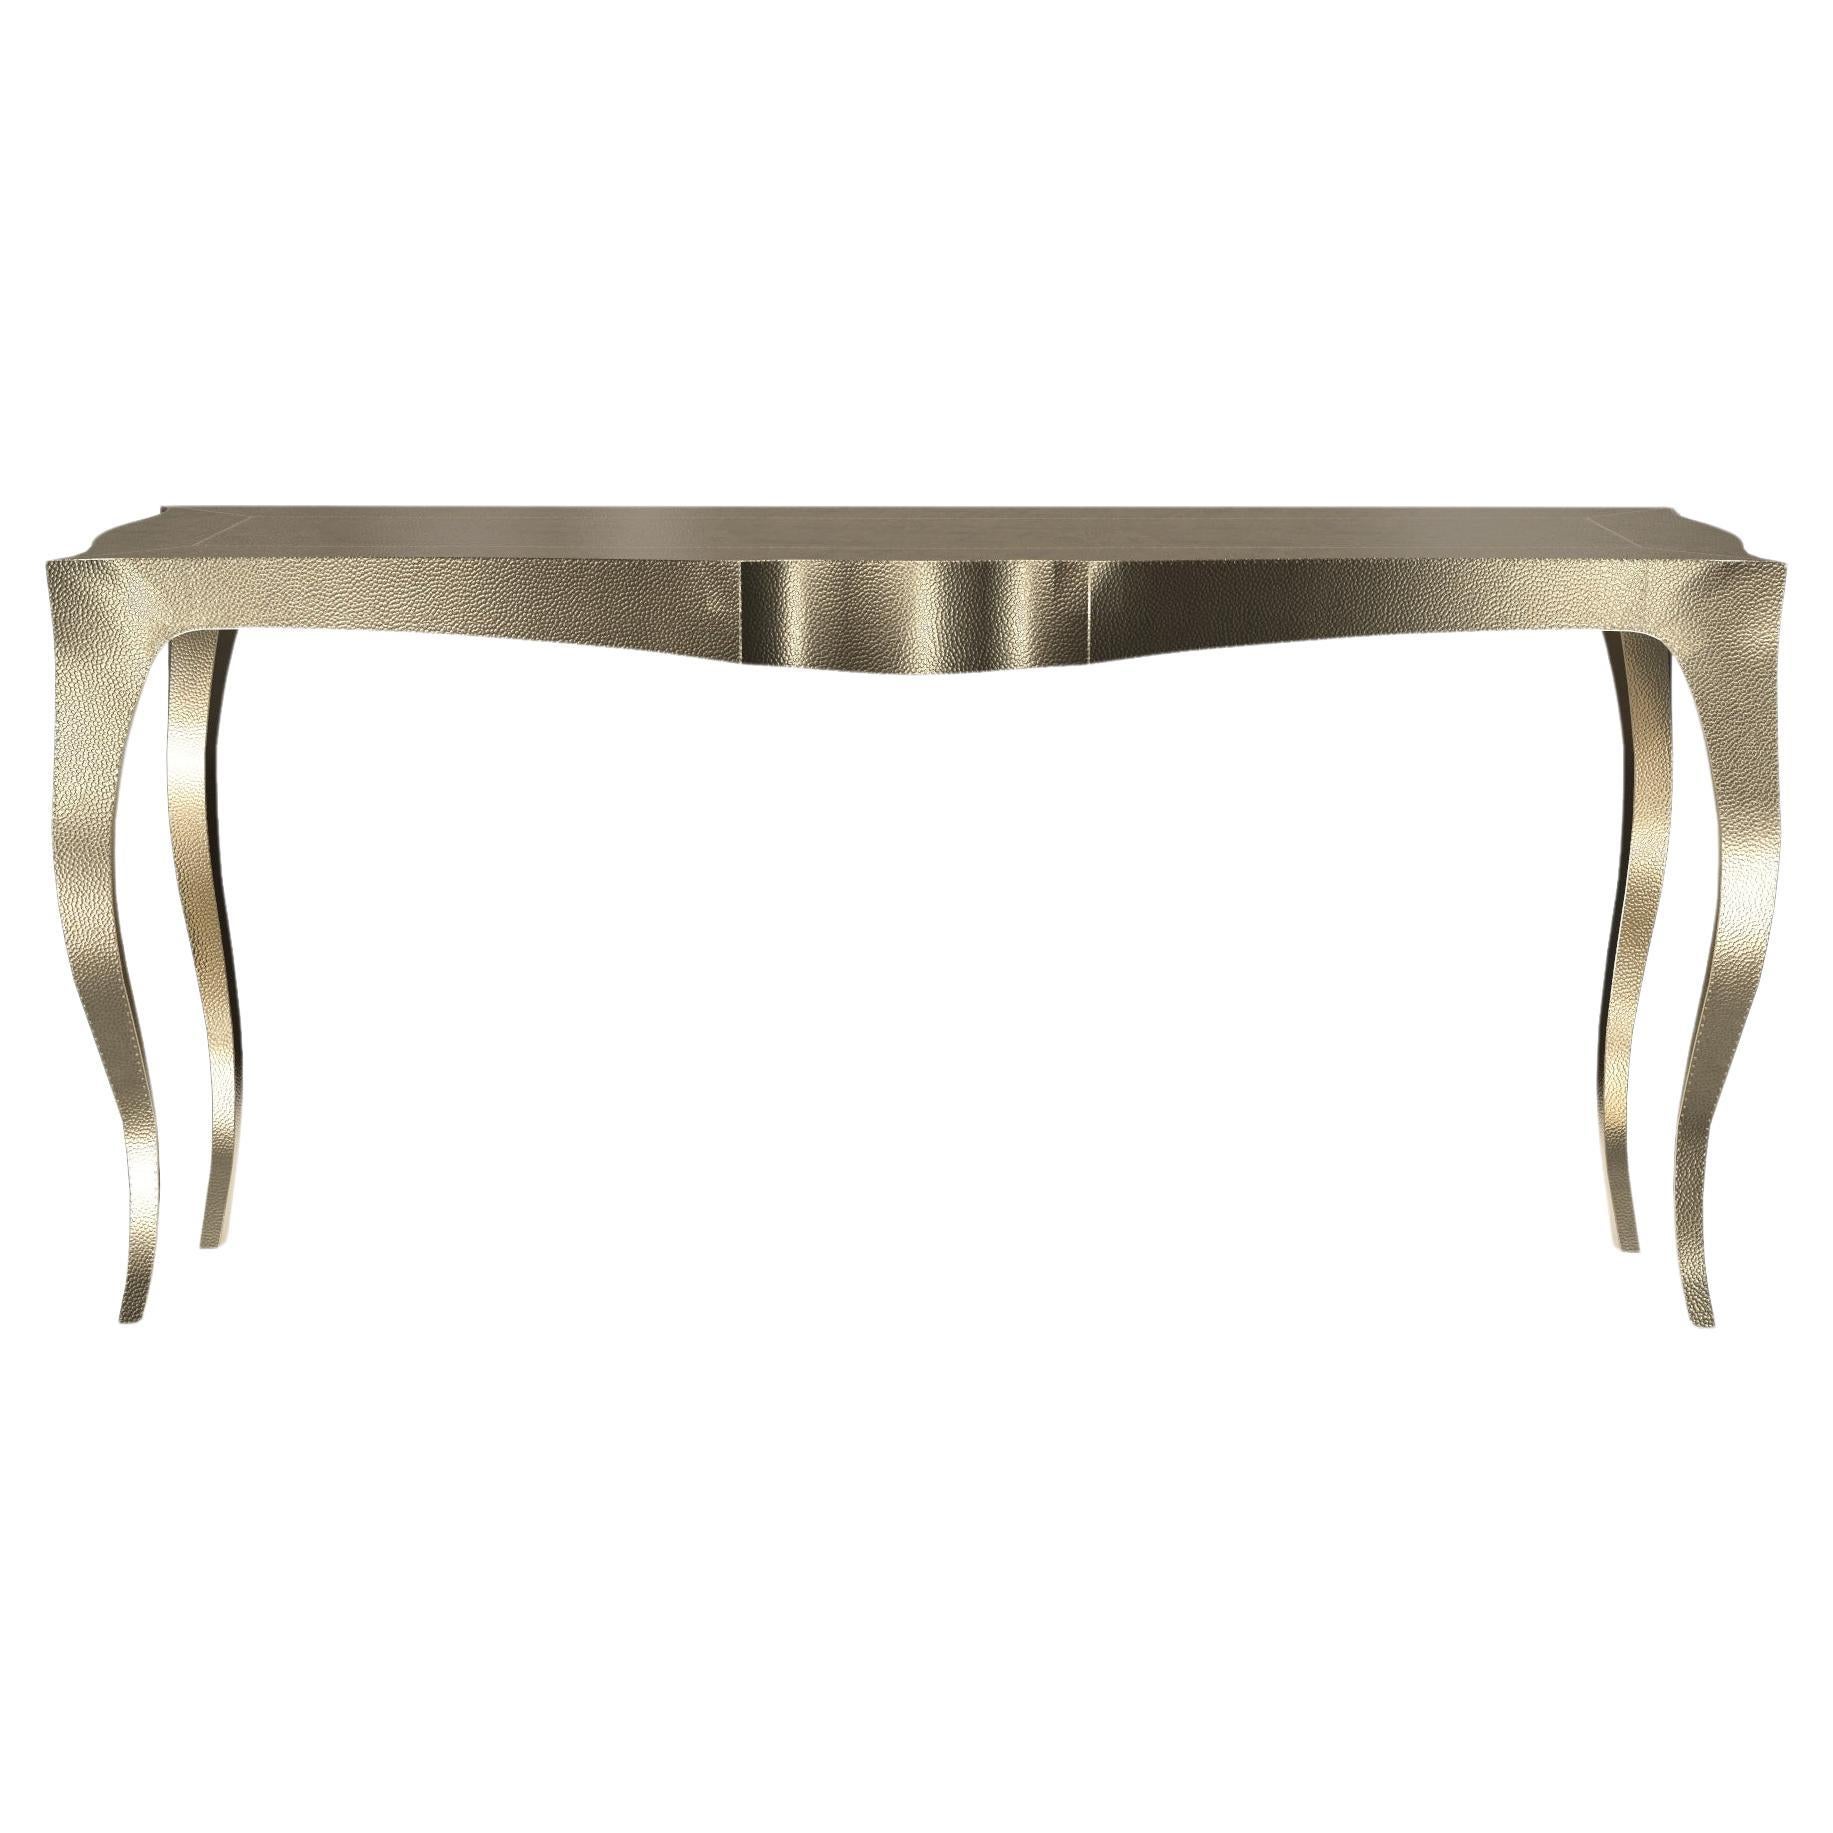 Louise Console Art Nouveau Tray Tables Mid. Hammered Brass by Paul Mathieu For Sale